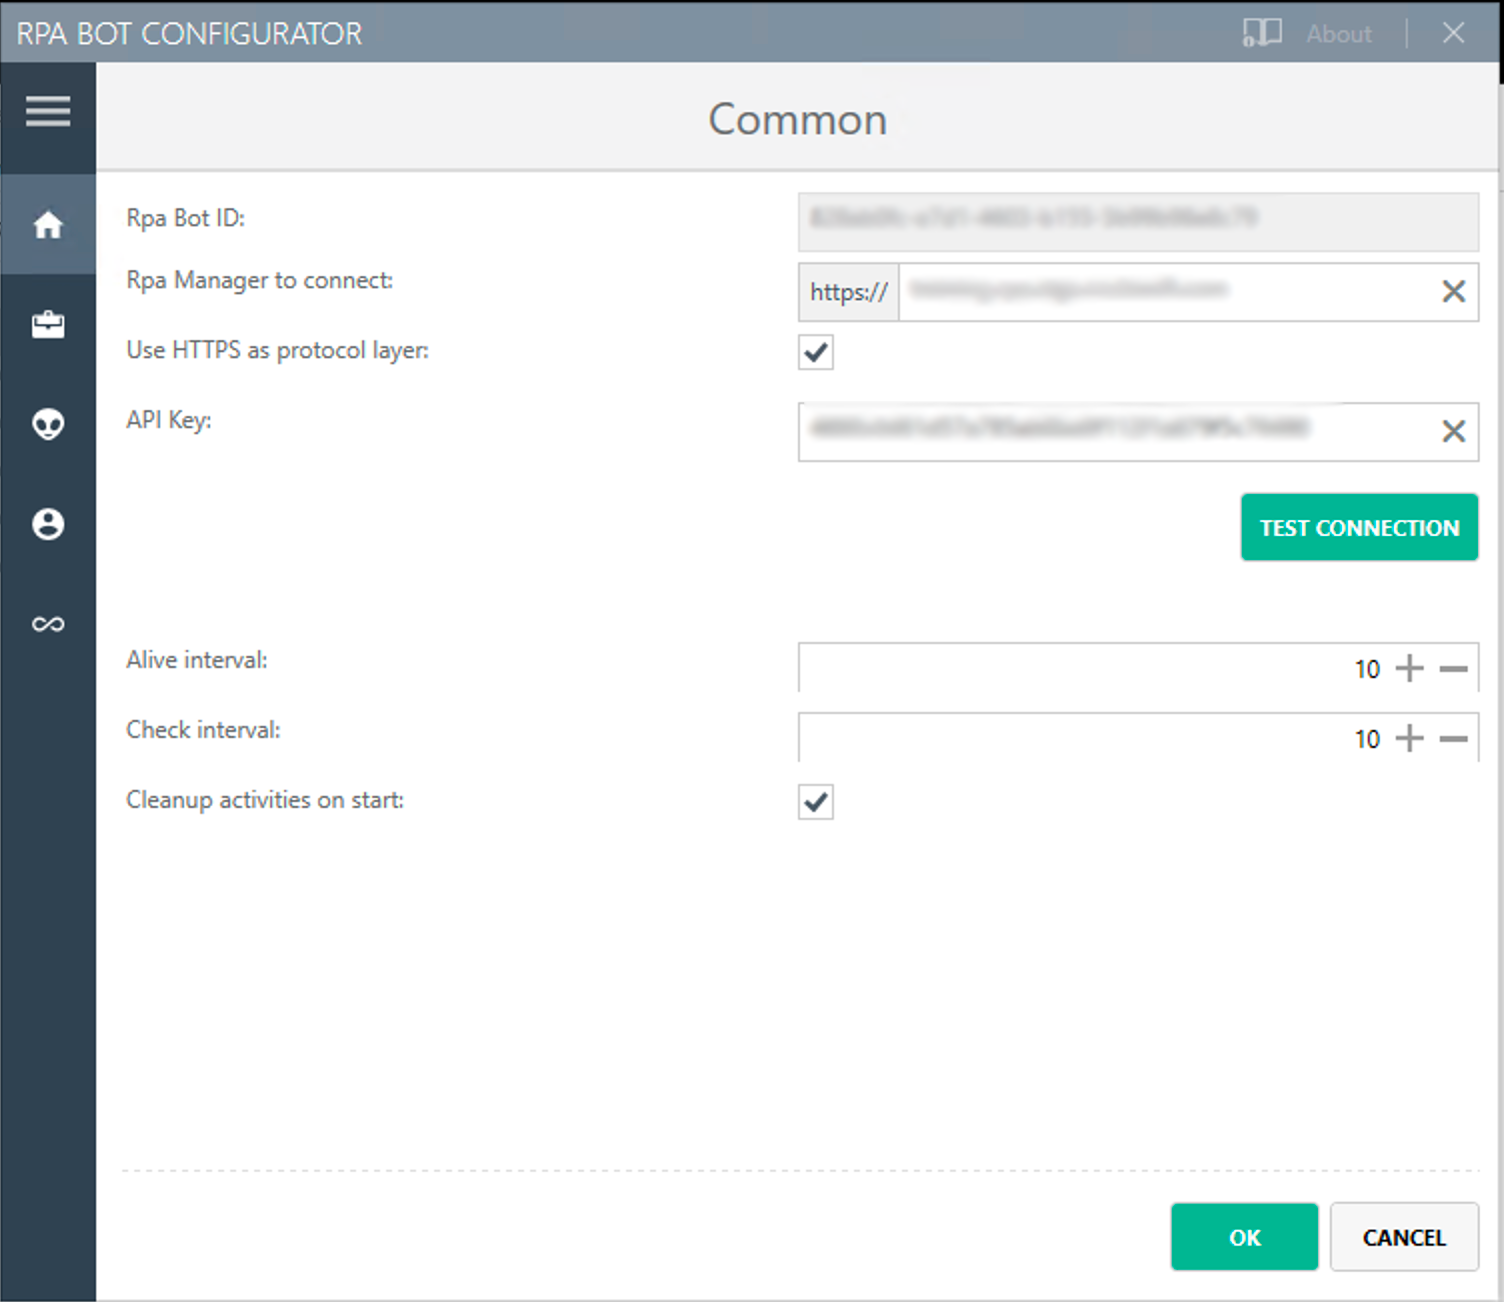 The RPA Bot configurator application showing the Common settings panel